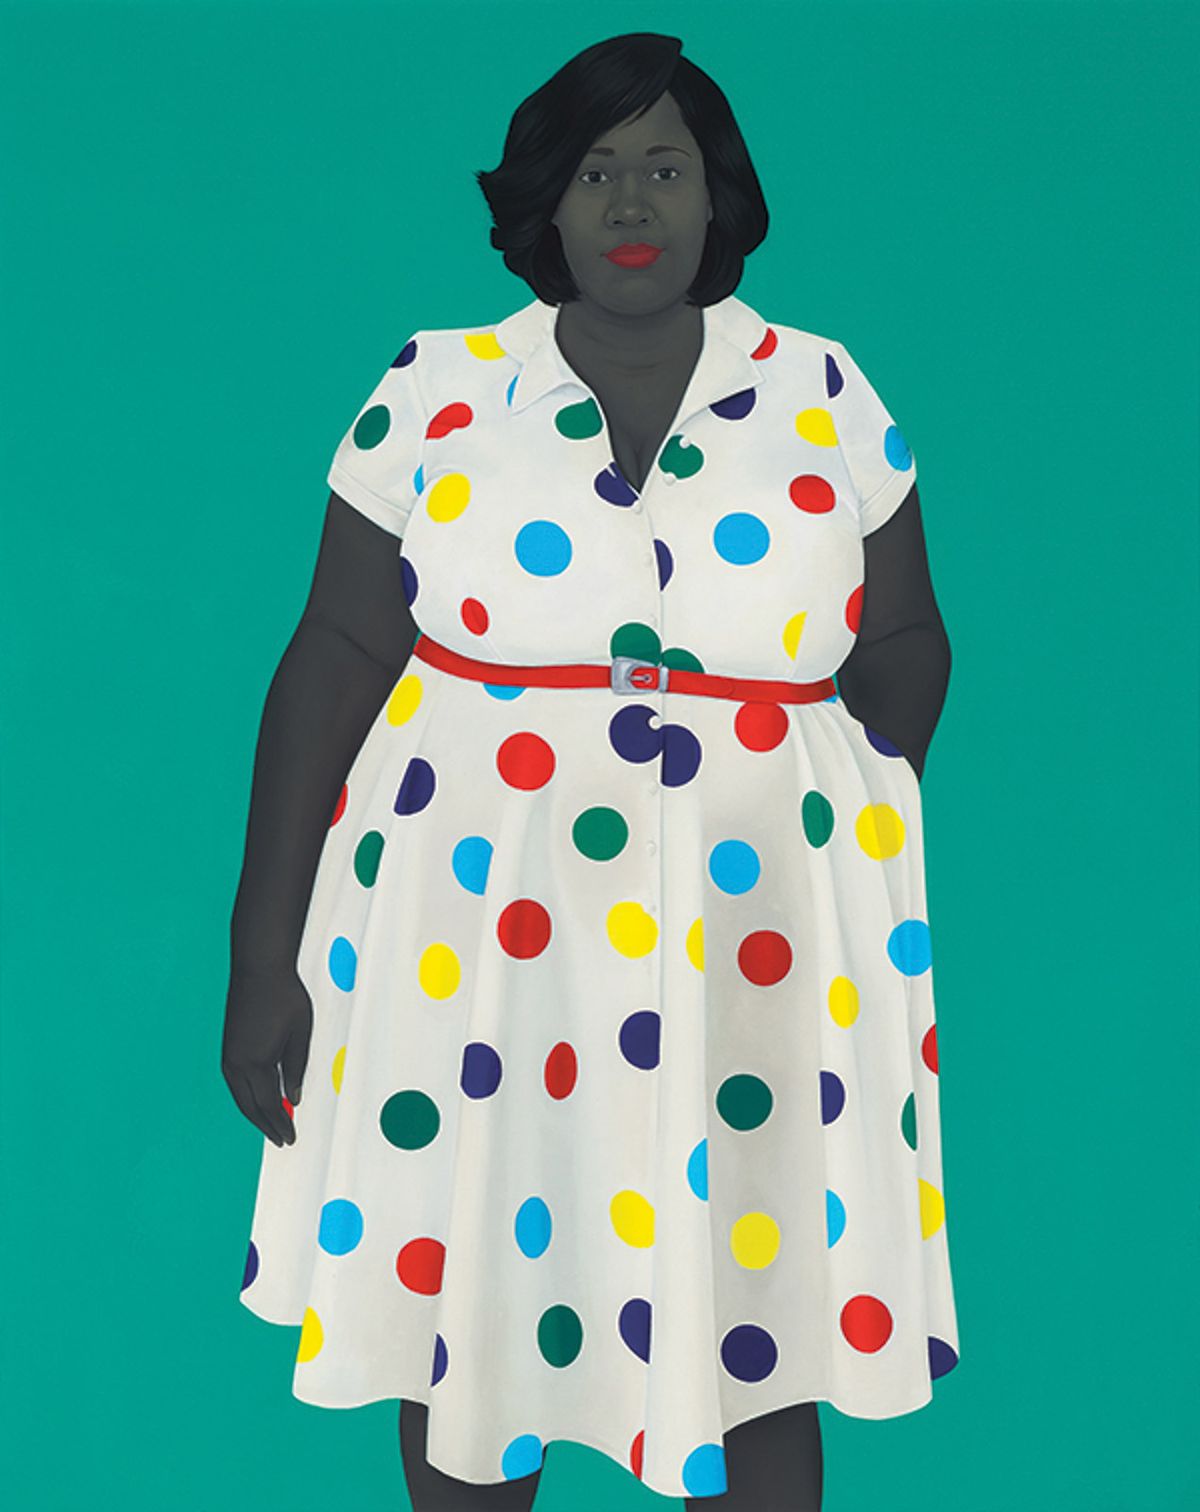 The Girl Next Door (2019) is among Sherald’s series of large canvases © Amy Sherald Courtesy the artist and Hauser & Wirth Photo: Joseph Hyde